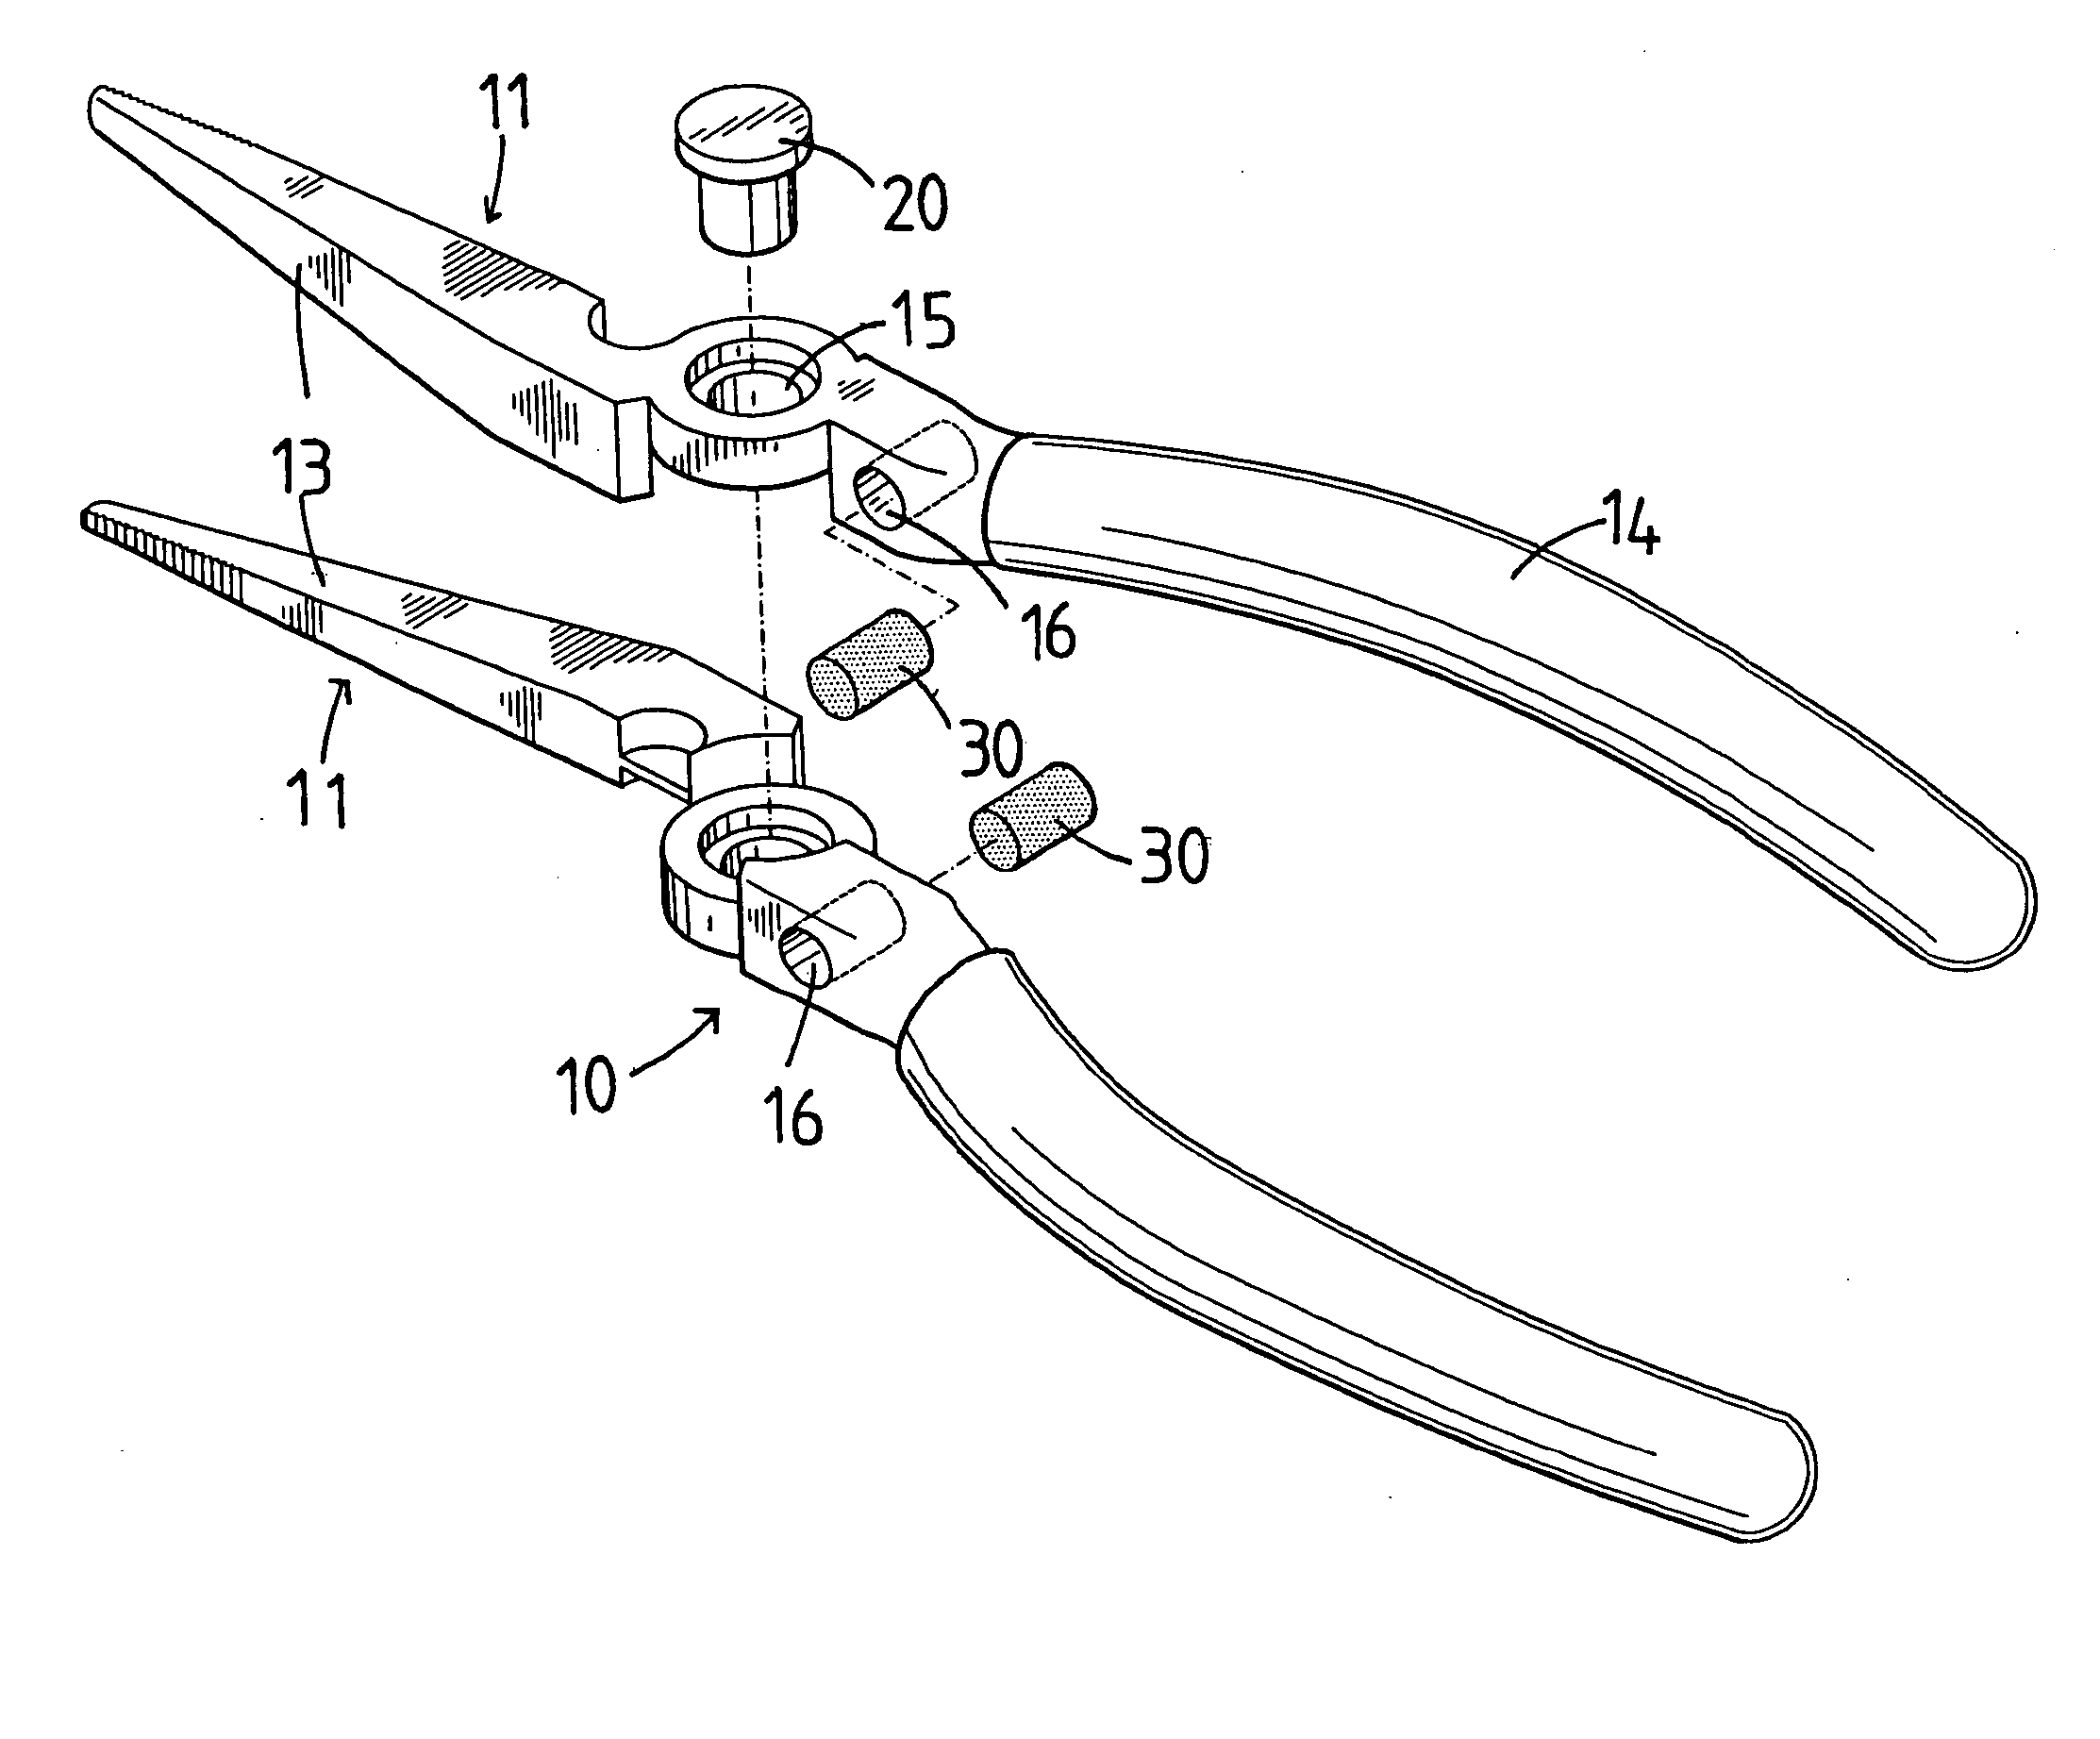 Hand tool having an extendable handle structure